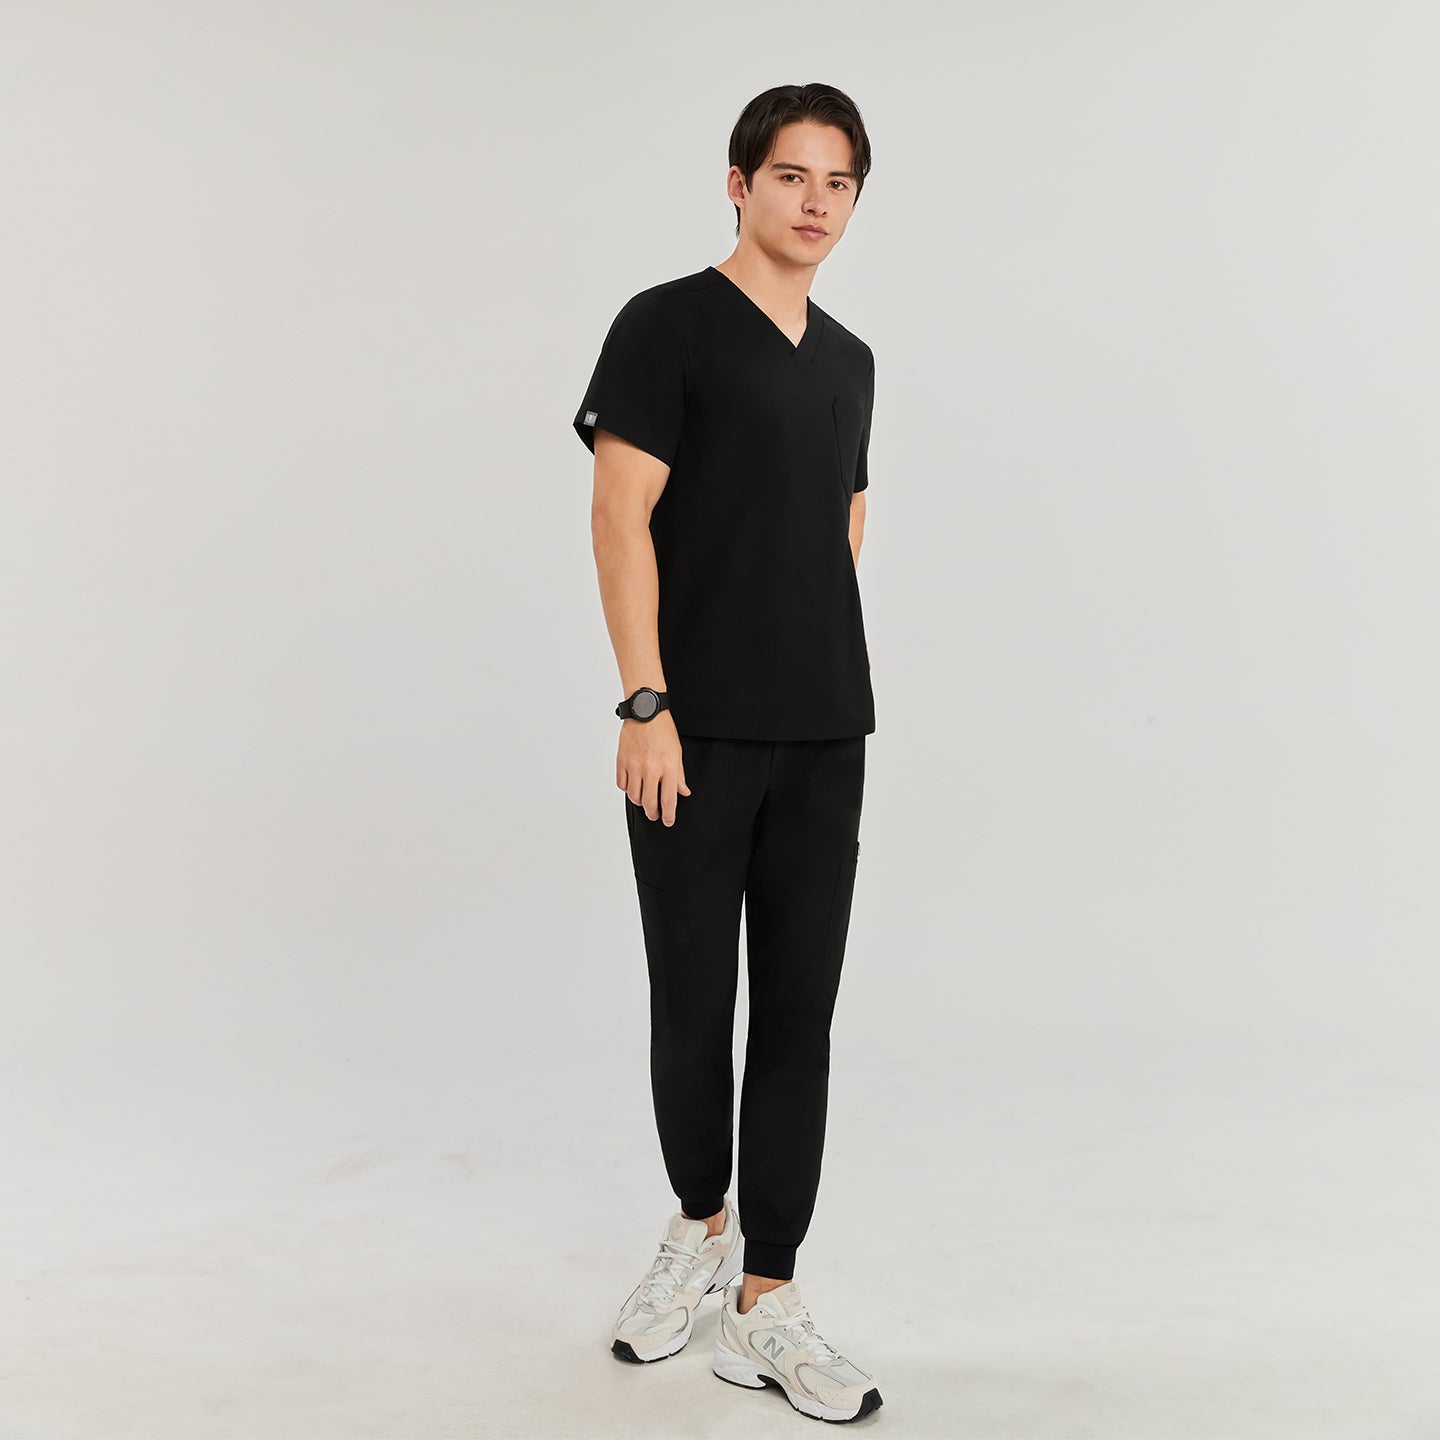 Man in black Zenir scrub top with chest pocket, standing and looking at the camera, full-body view,Black